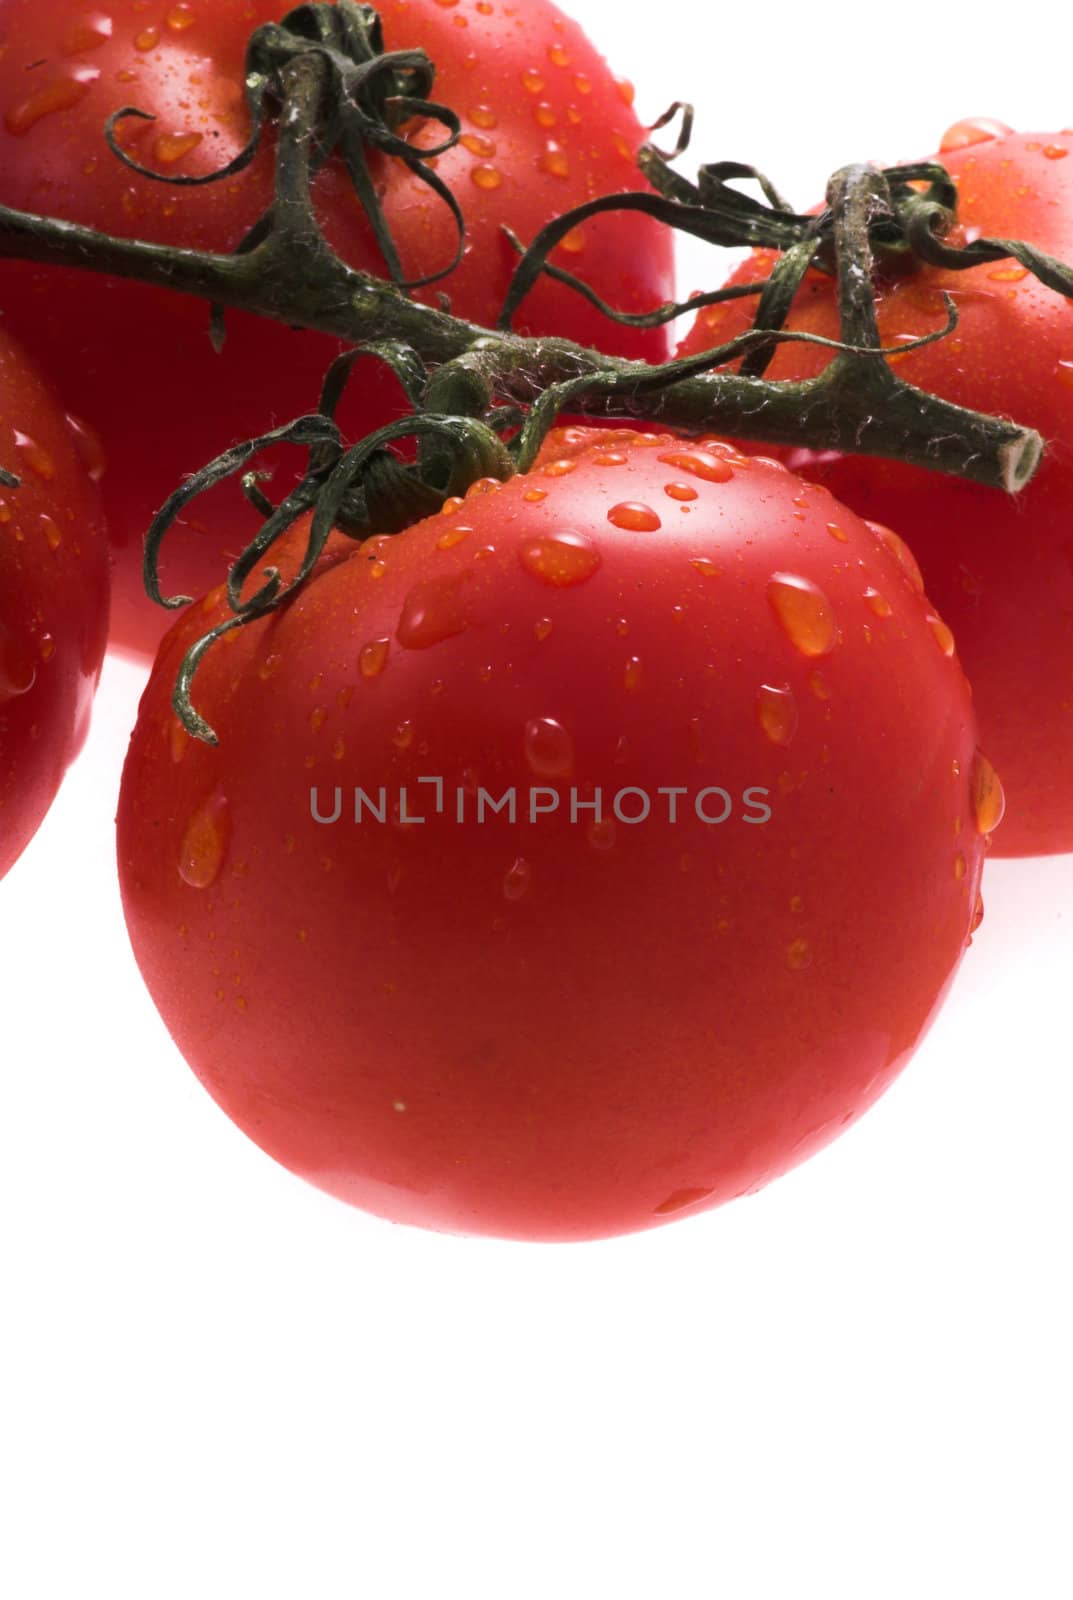 bunch, color, cooking, diet, eat, eating, food, foods, fresh, green, grown, head, health, healthful, healthy, home, icon, ingredient, ingredients, life, meal, meals, natural, nature, nutrition, object, organic, plant, plants, produce, red, still, studio, tomato, tomatoes, vegetable, vegetables, veggie, veggies, vitamin, vitamins, wellness, white 